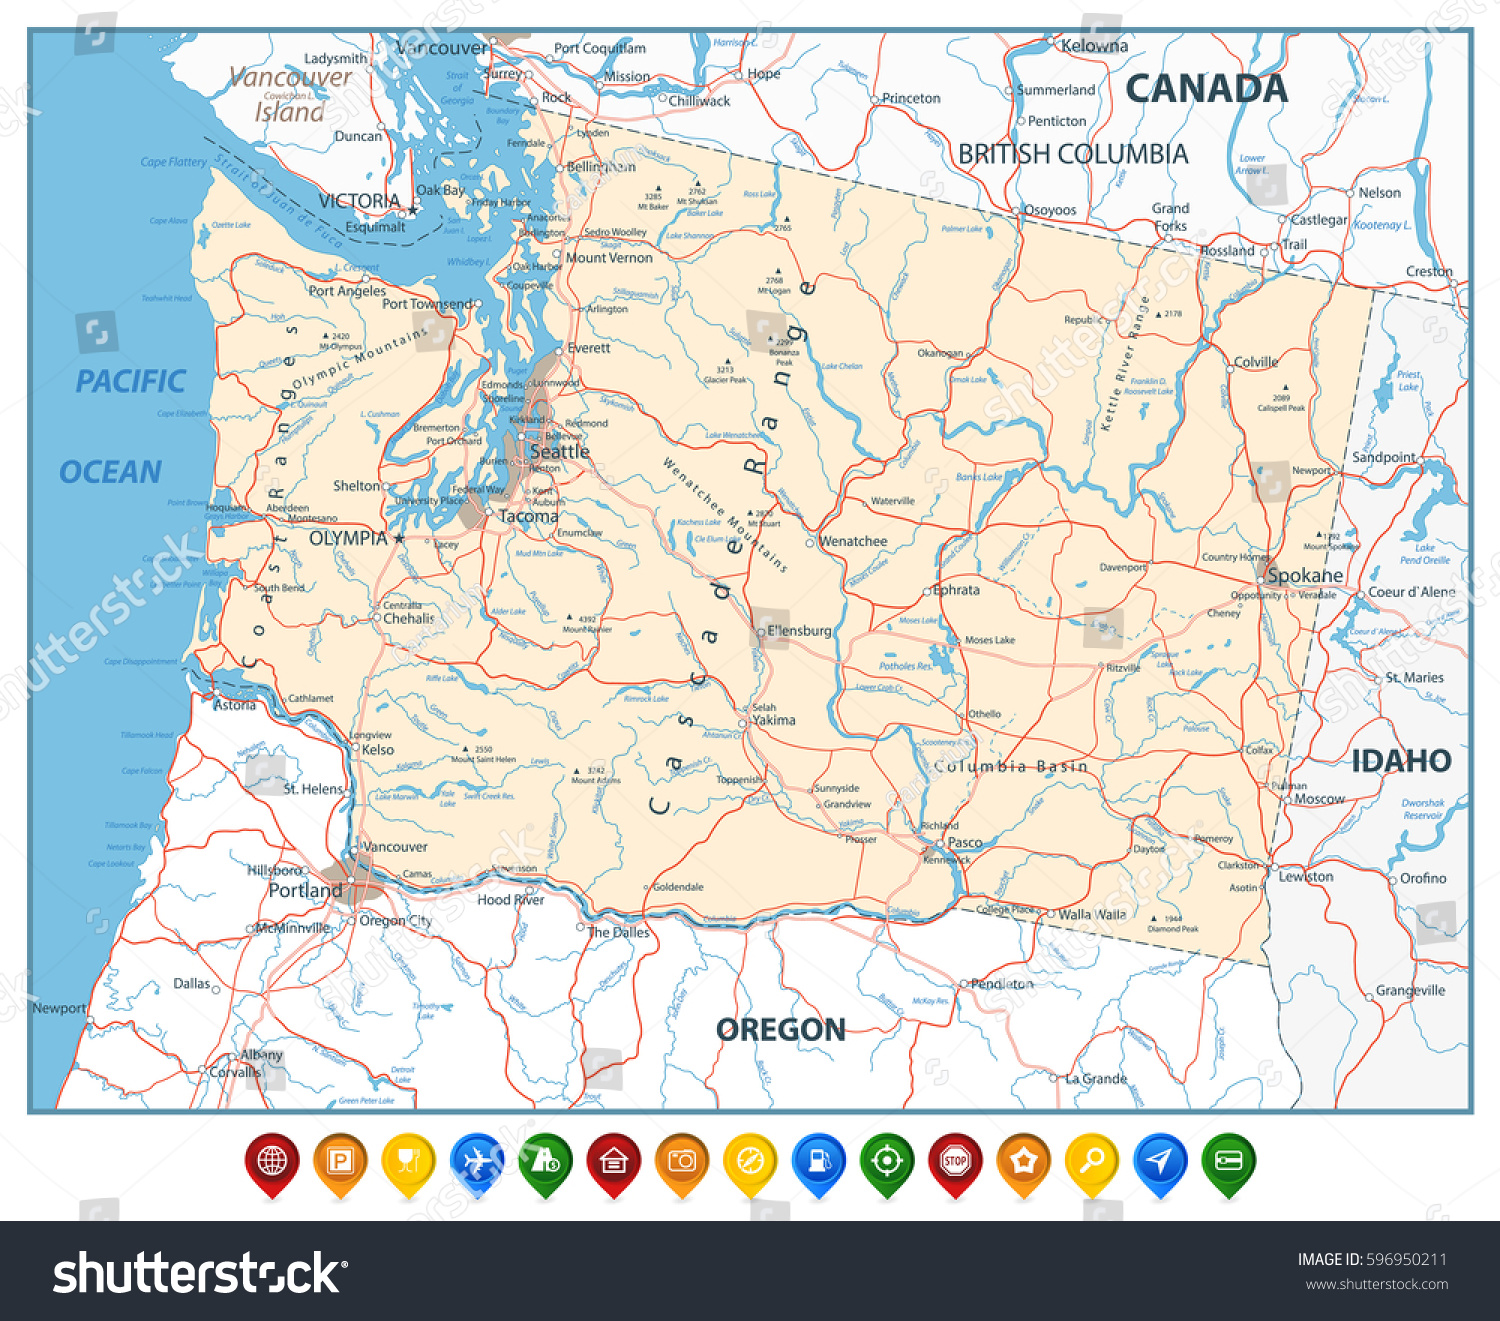 SVG of Washington state map with colorful map pointers with roads, rivers, lakes and highways. svg